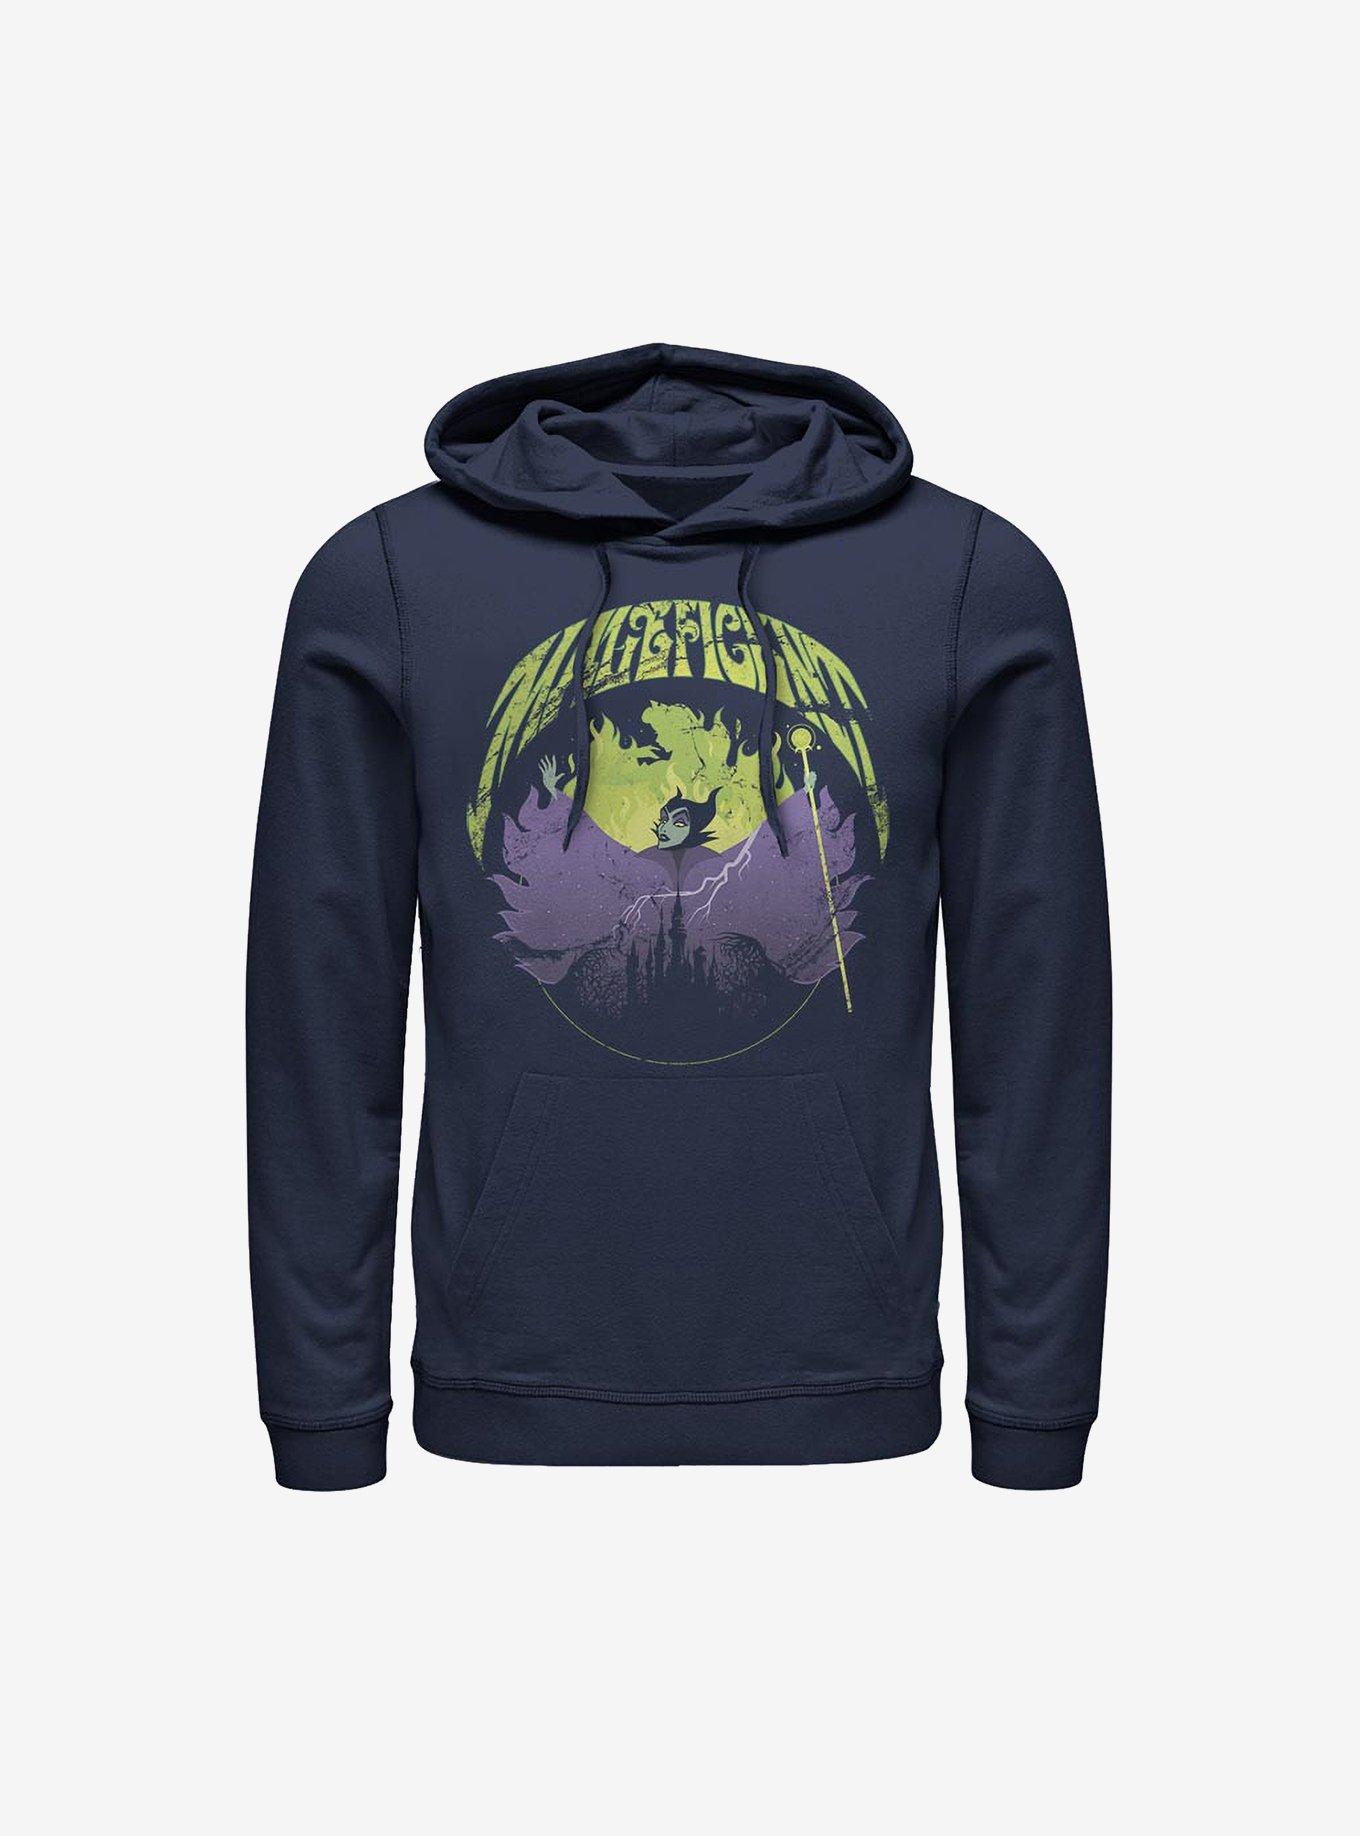 Disney Maleficent Maleficent Castle Flame Outline Hoodie, NAVY, hi-res